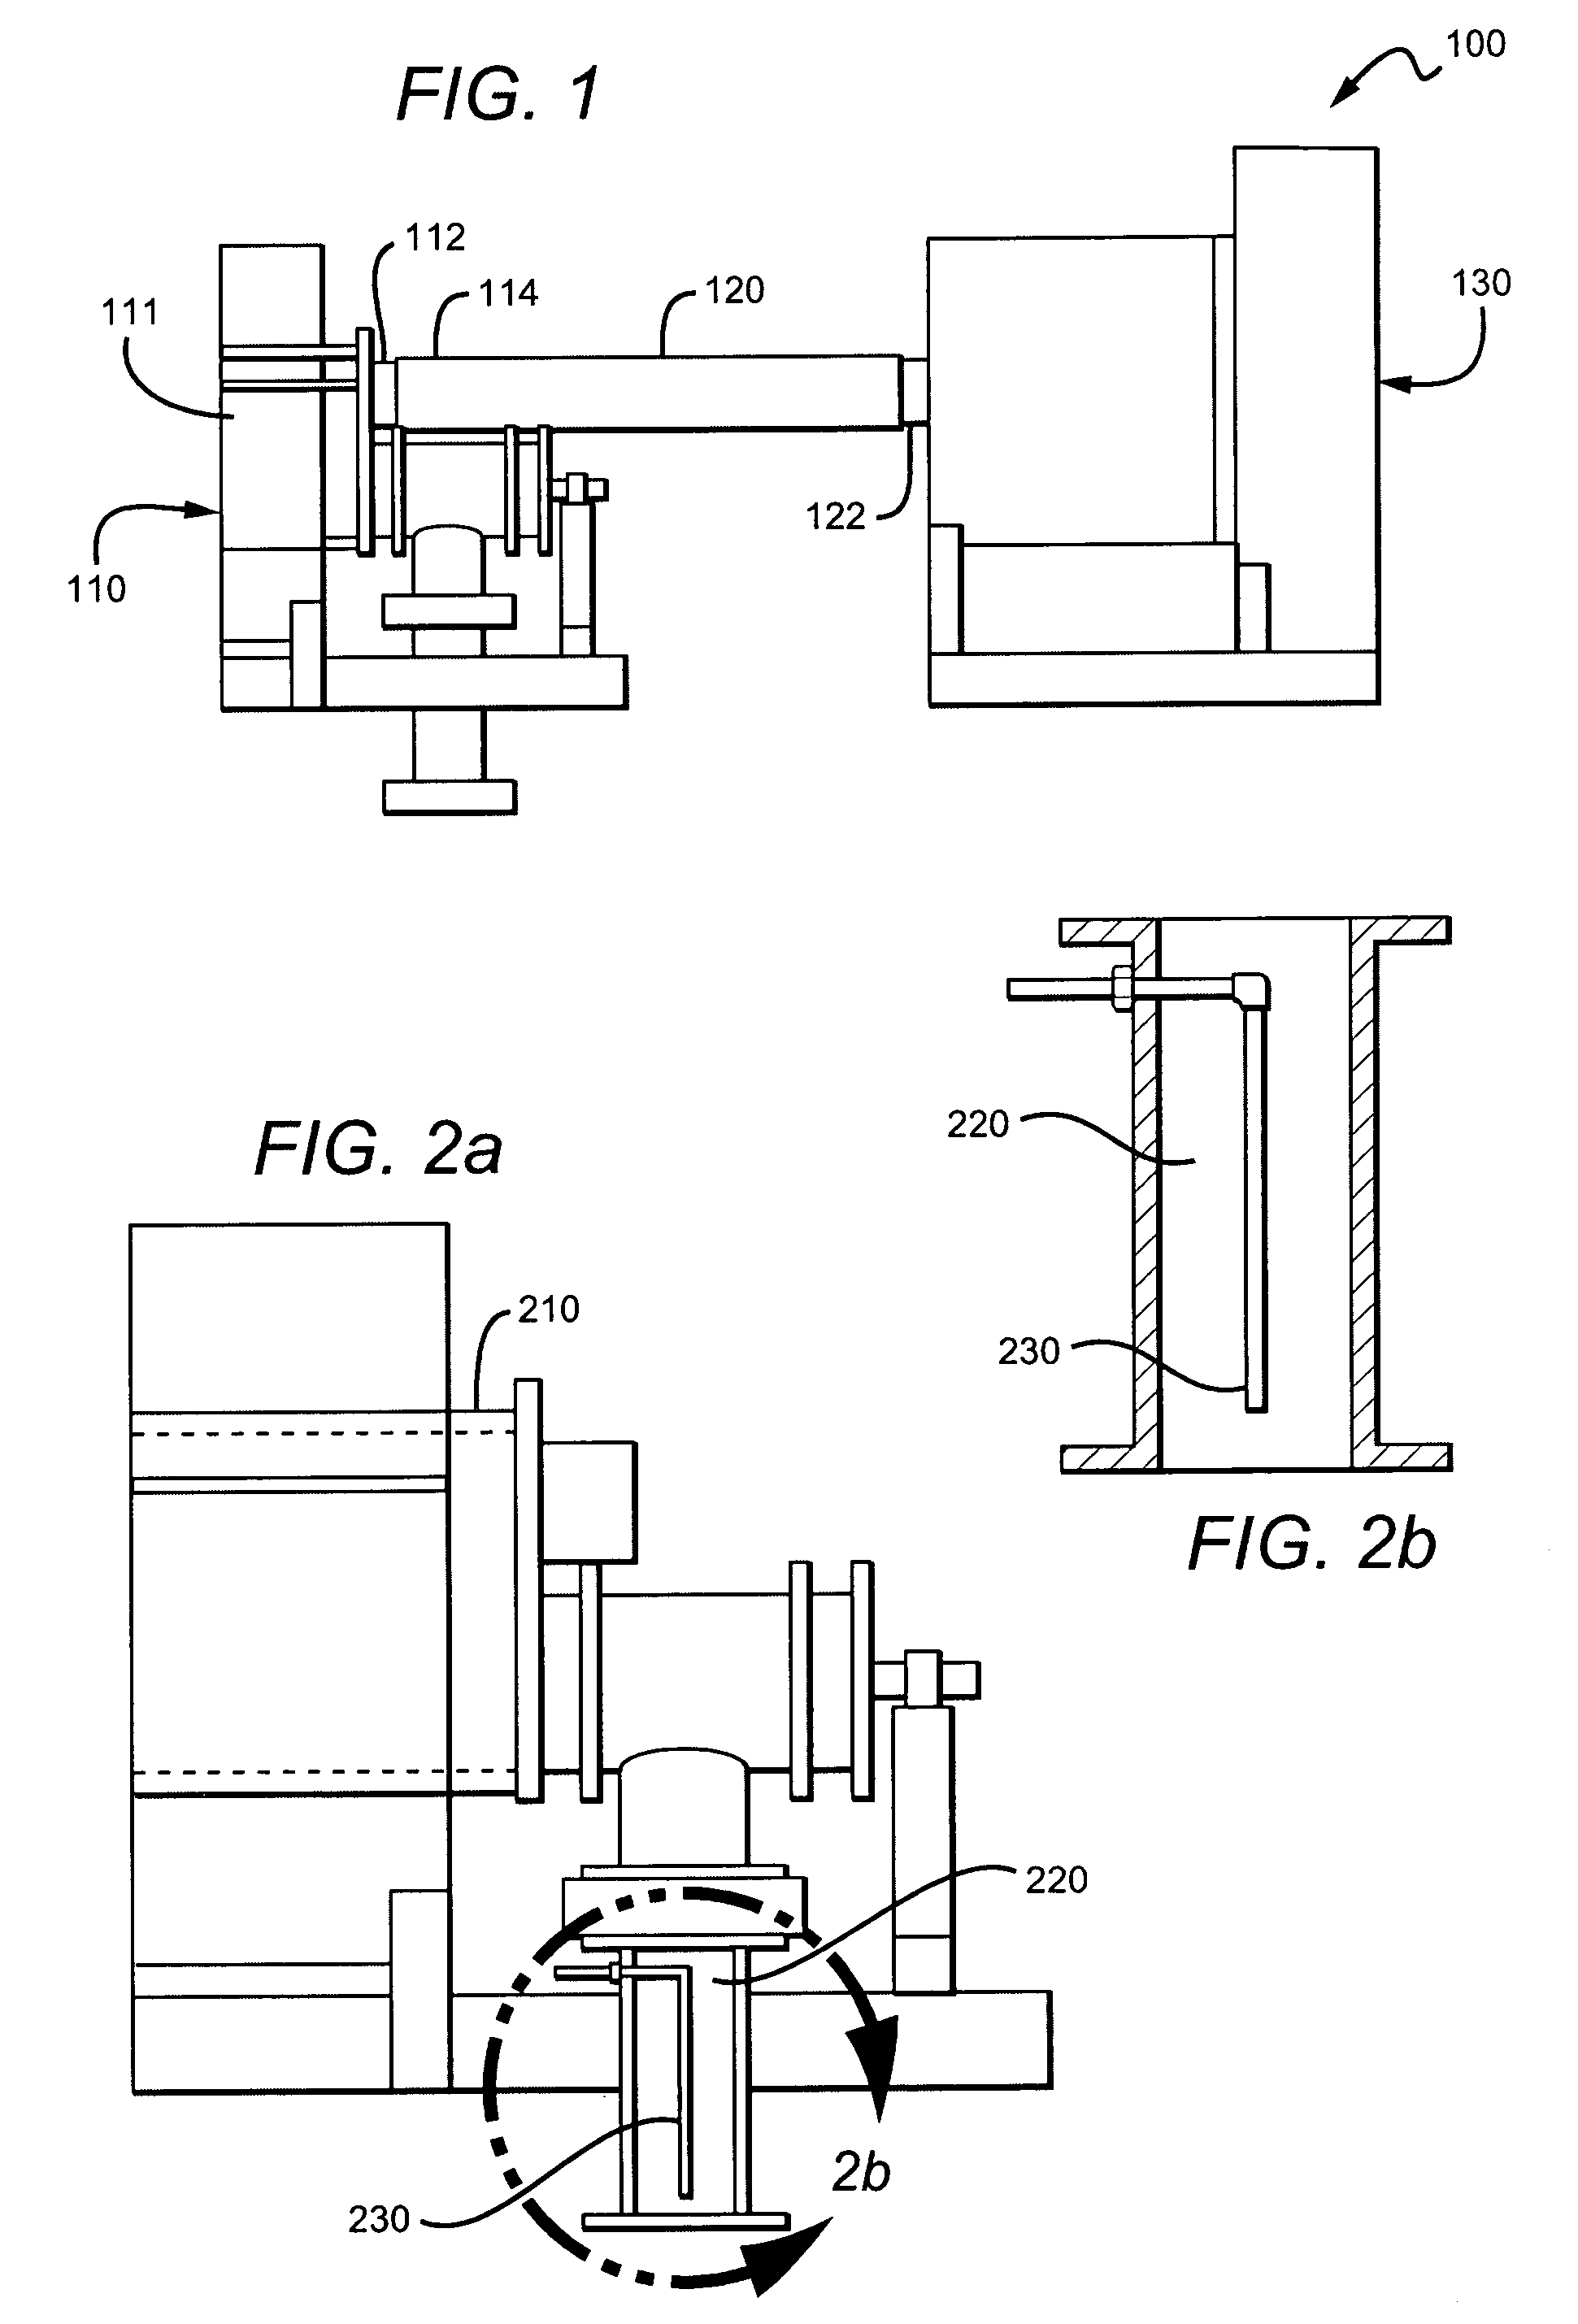 Outlets for a pyrolytic waste treatment system